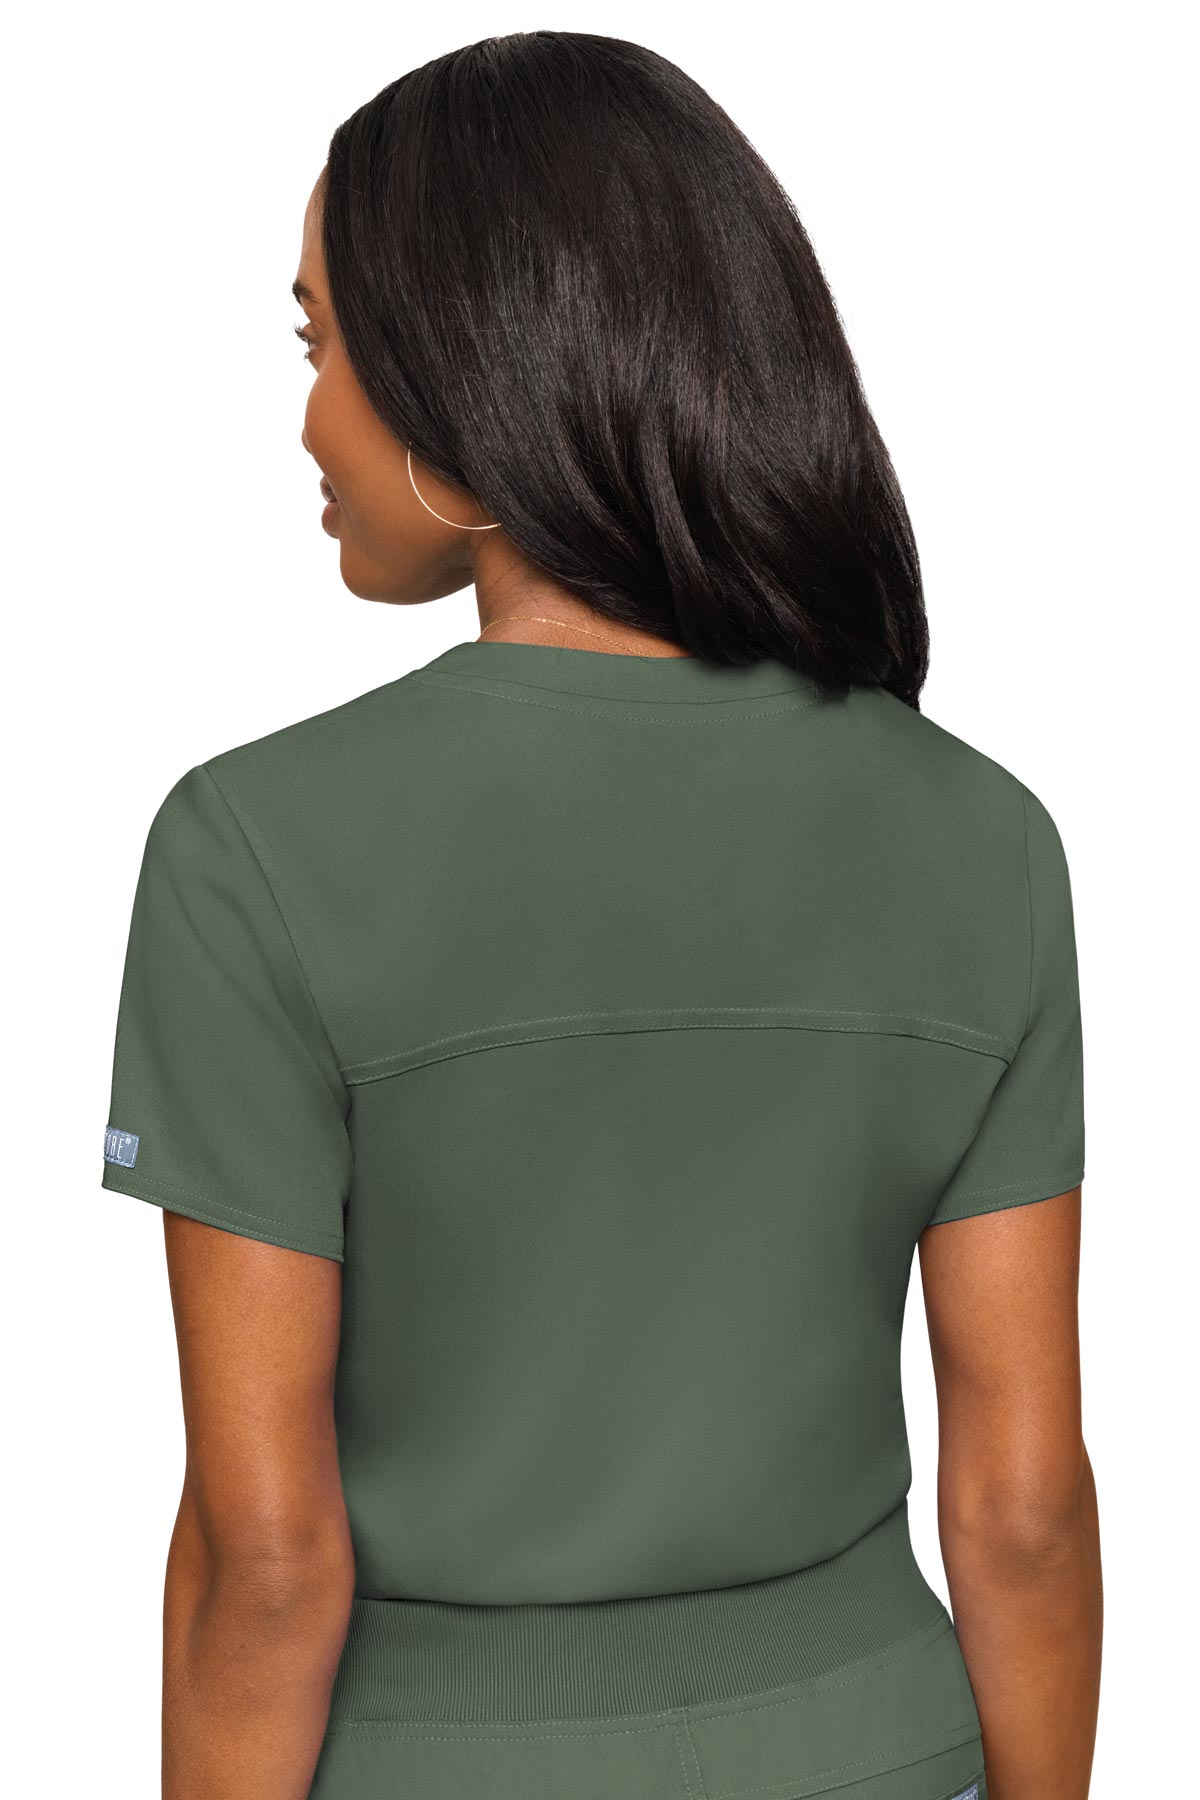 Med Couture Touch 7448 Women's Tuckable Chest Pocket Top Olive Back